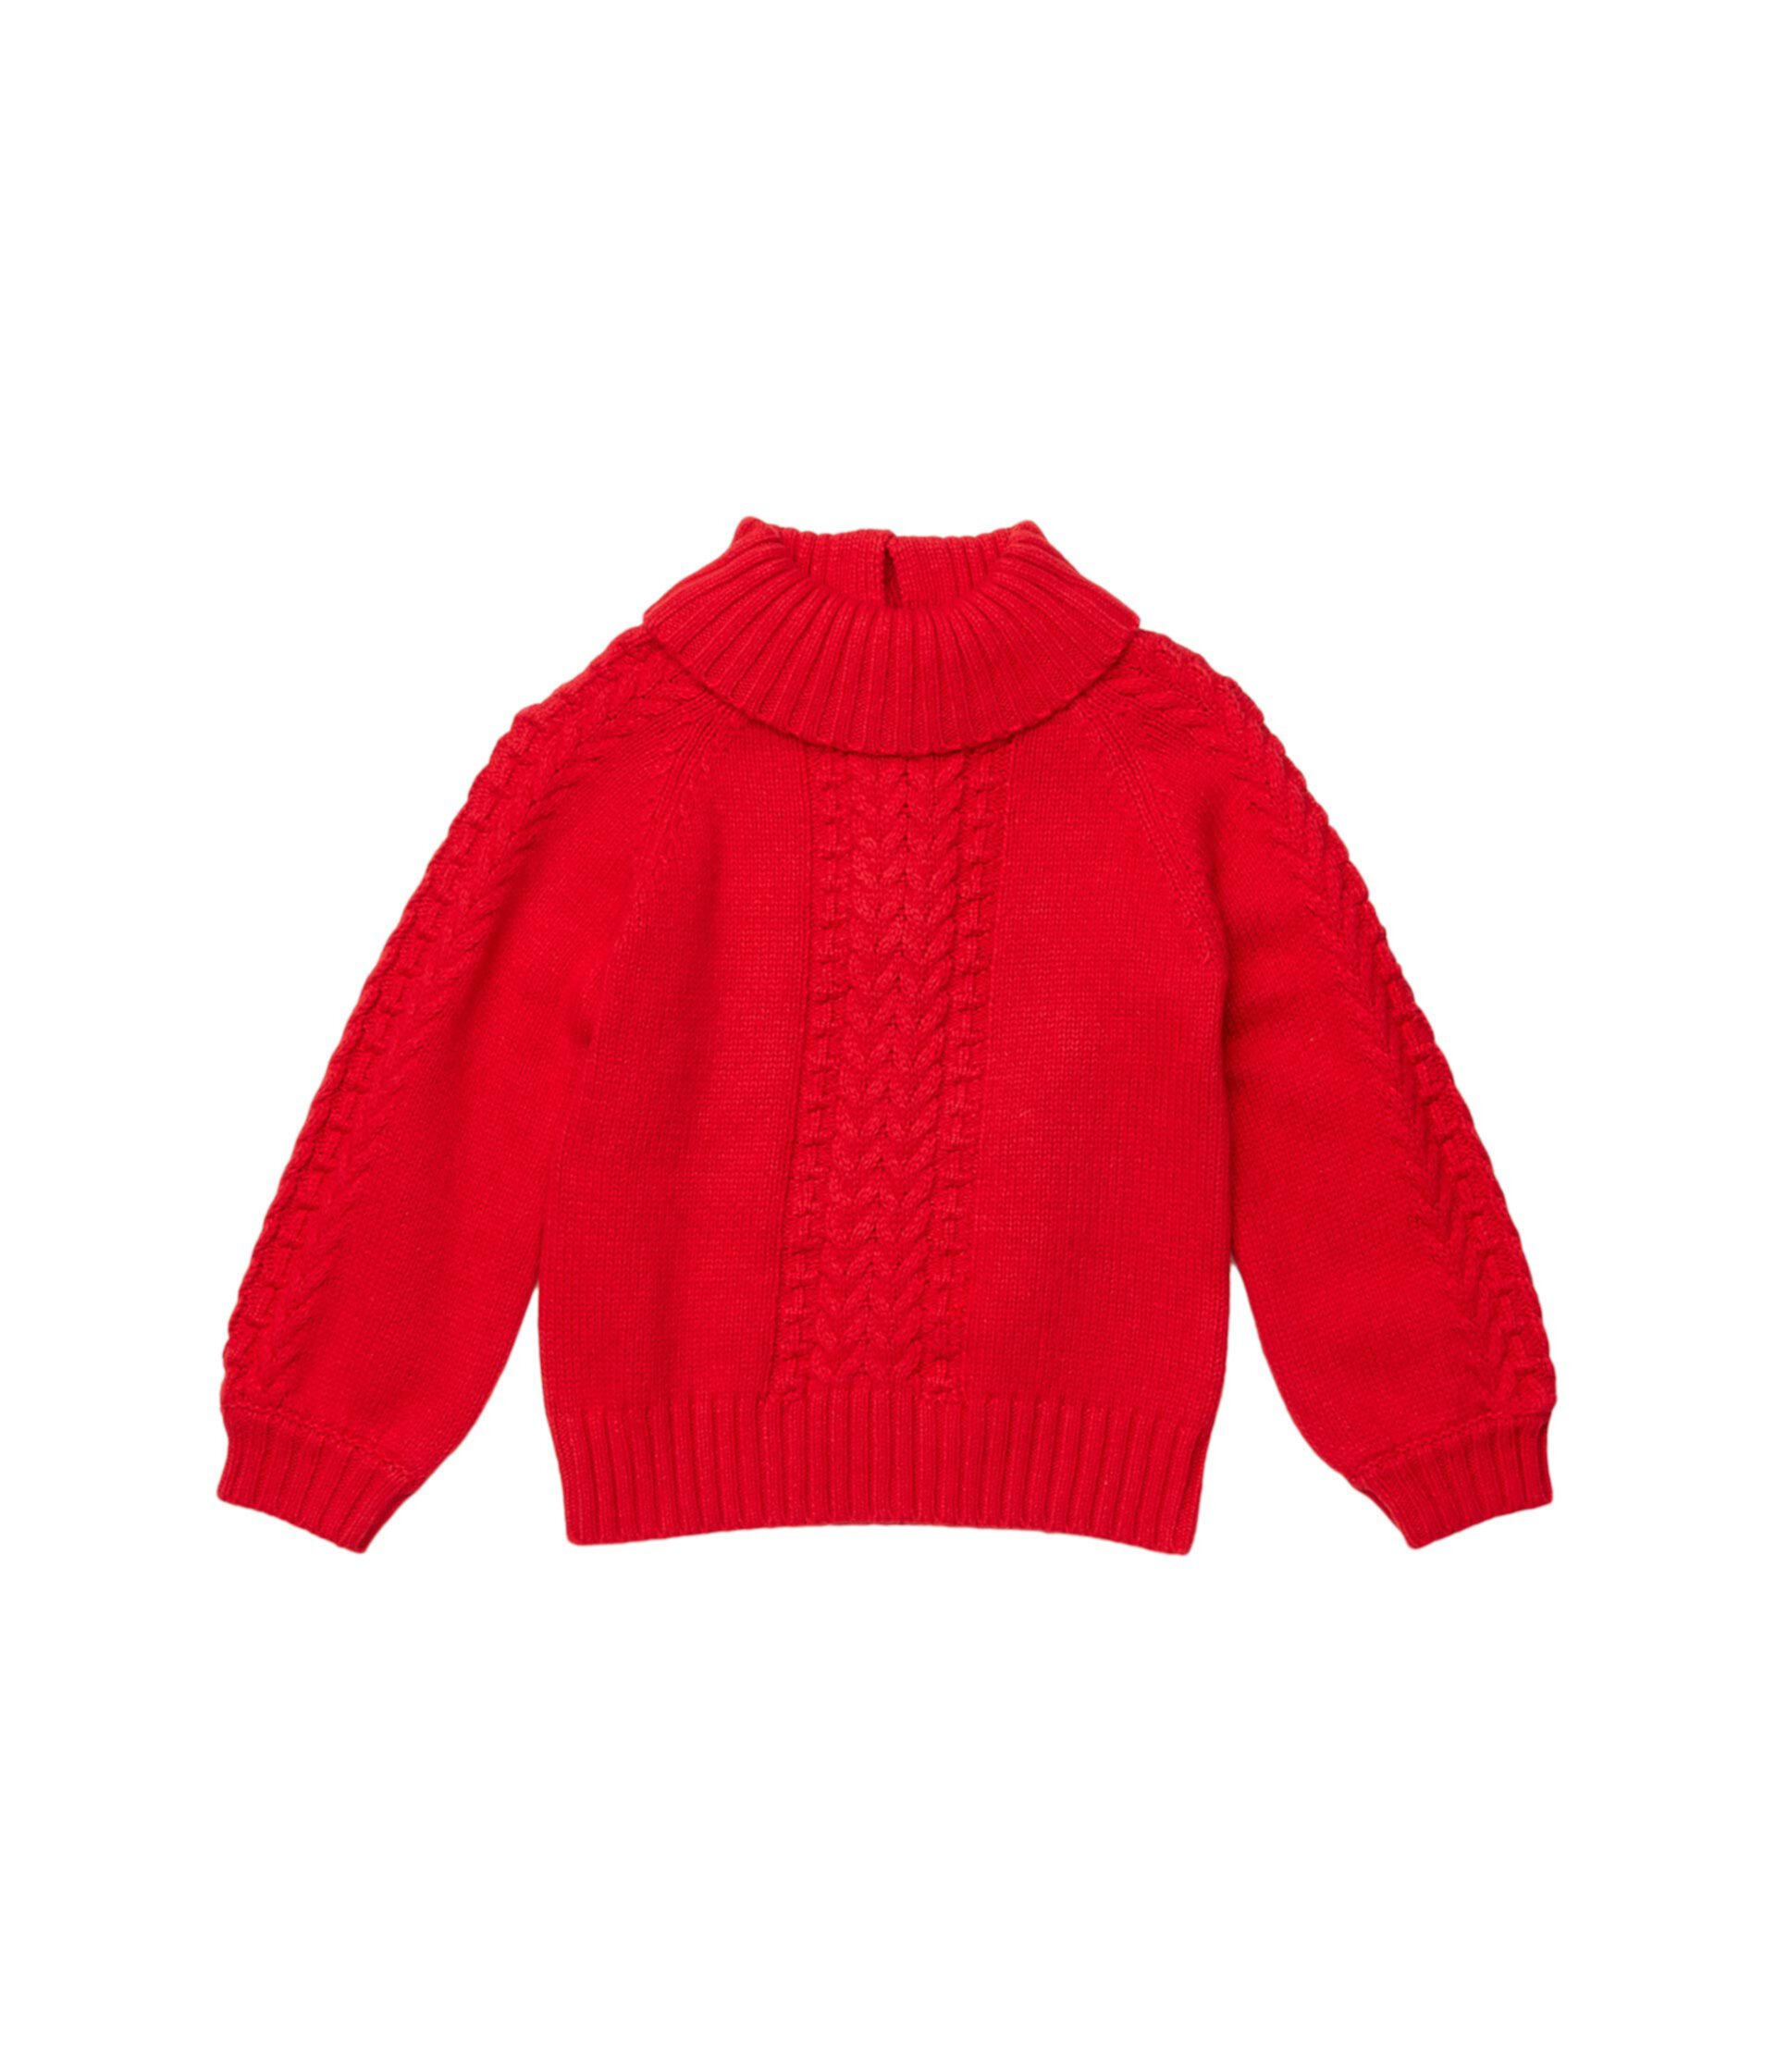 Sweater (Toddler/Little Kids/Big Kids) Janie and Jack